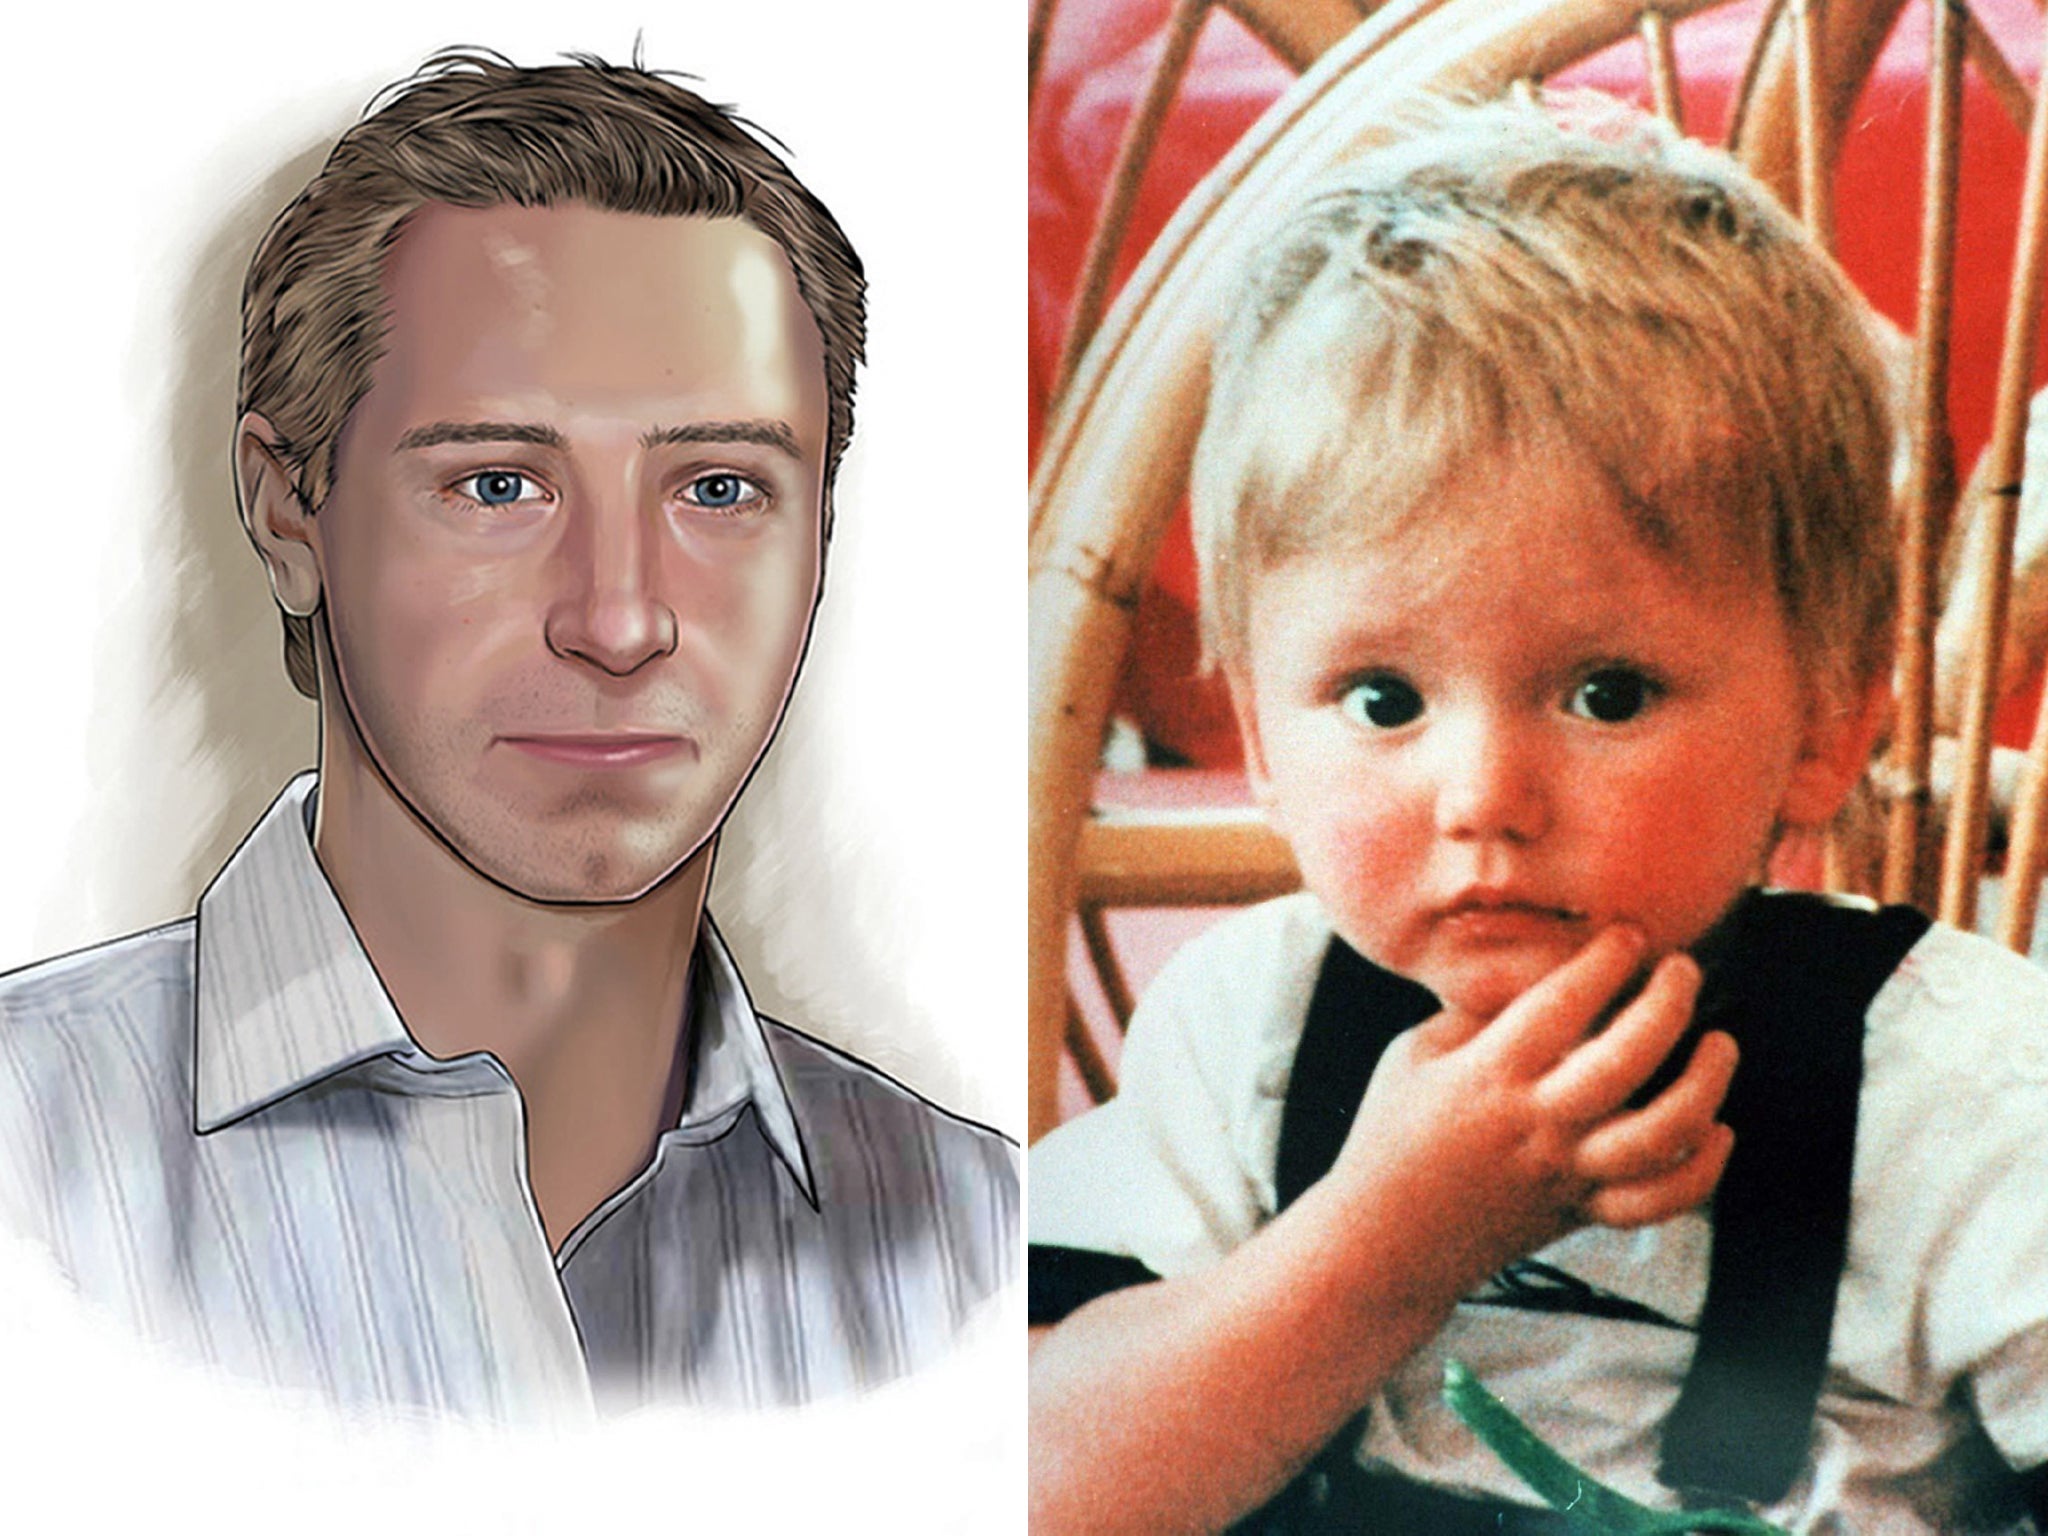 How Ben might have looked in 2012, and a family photo of the toddler